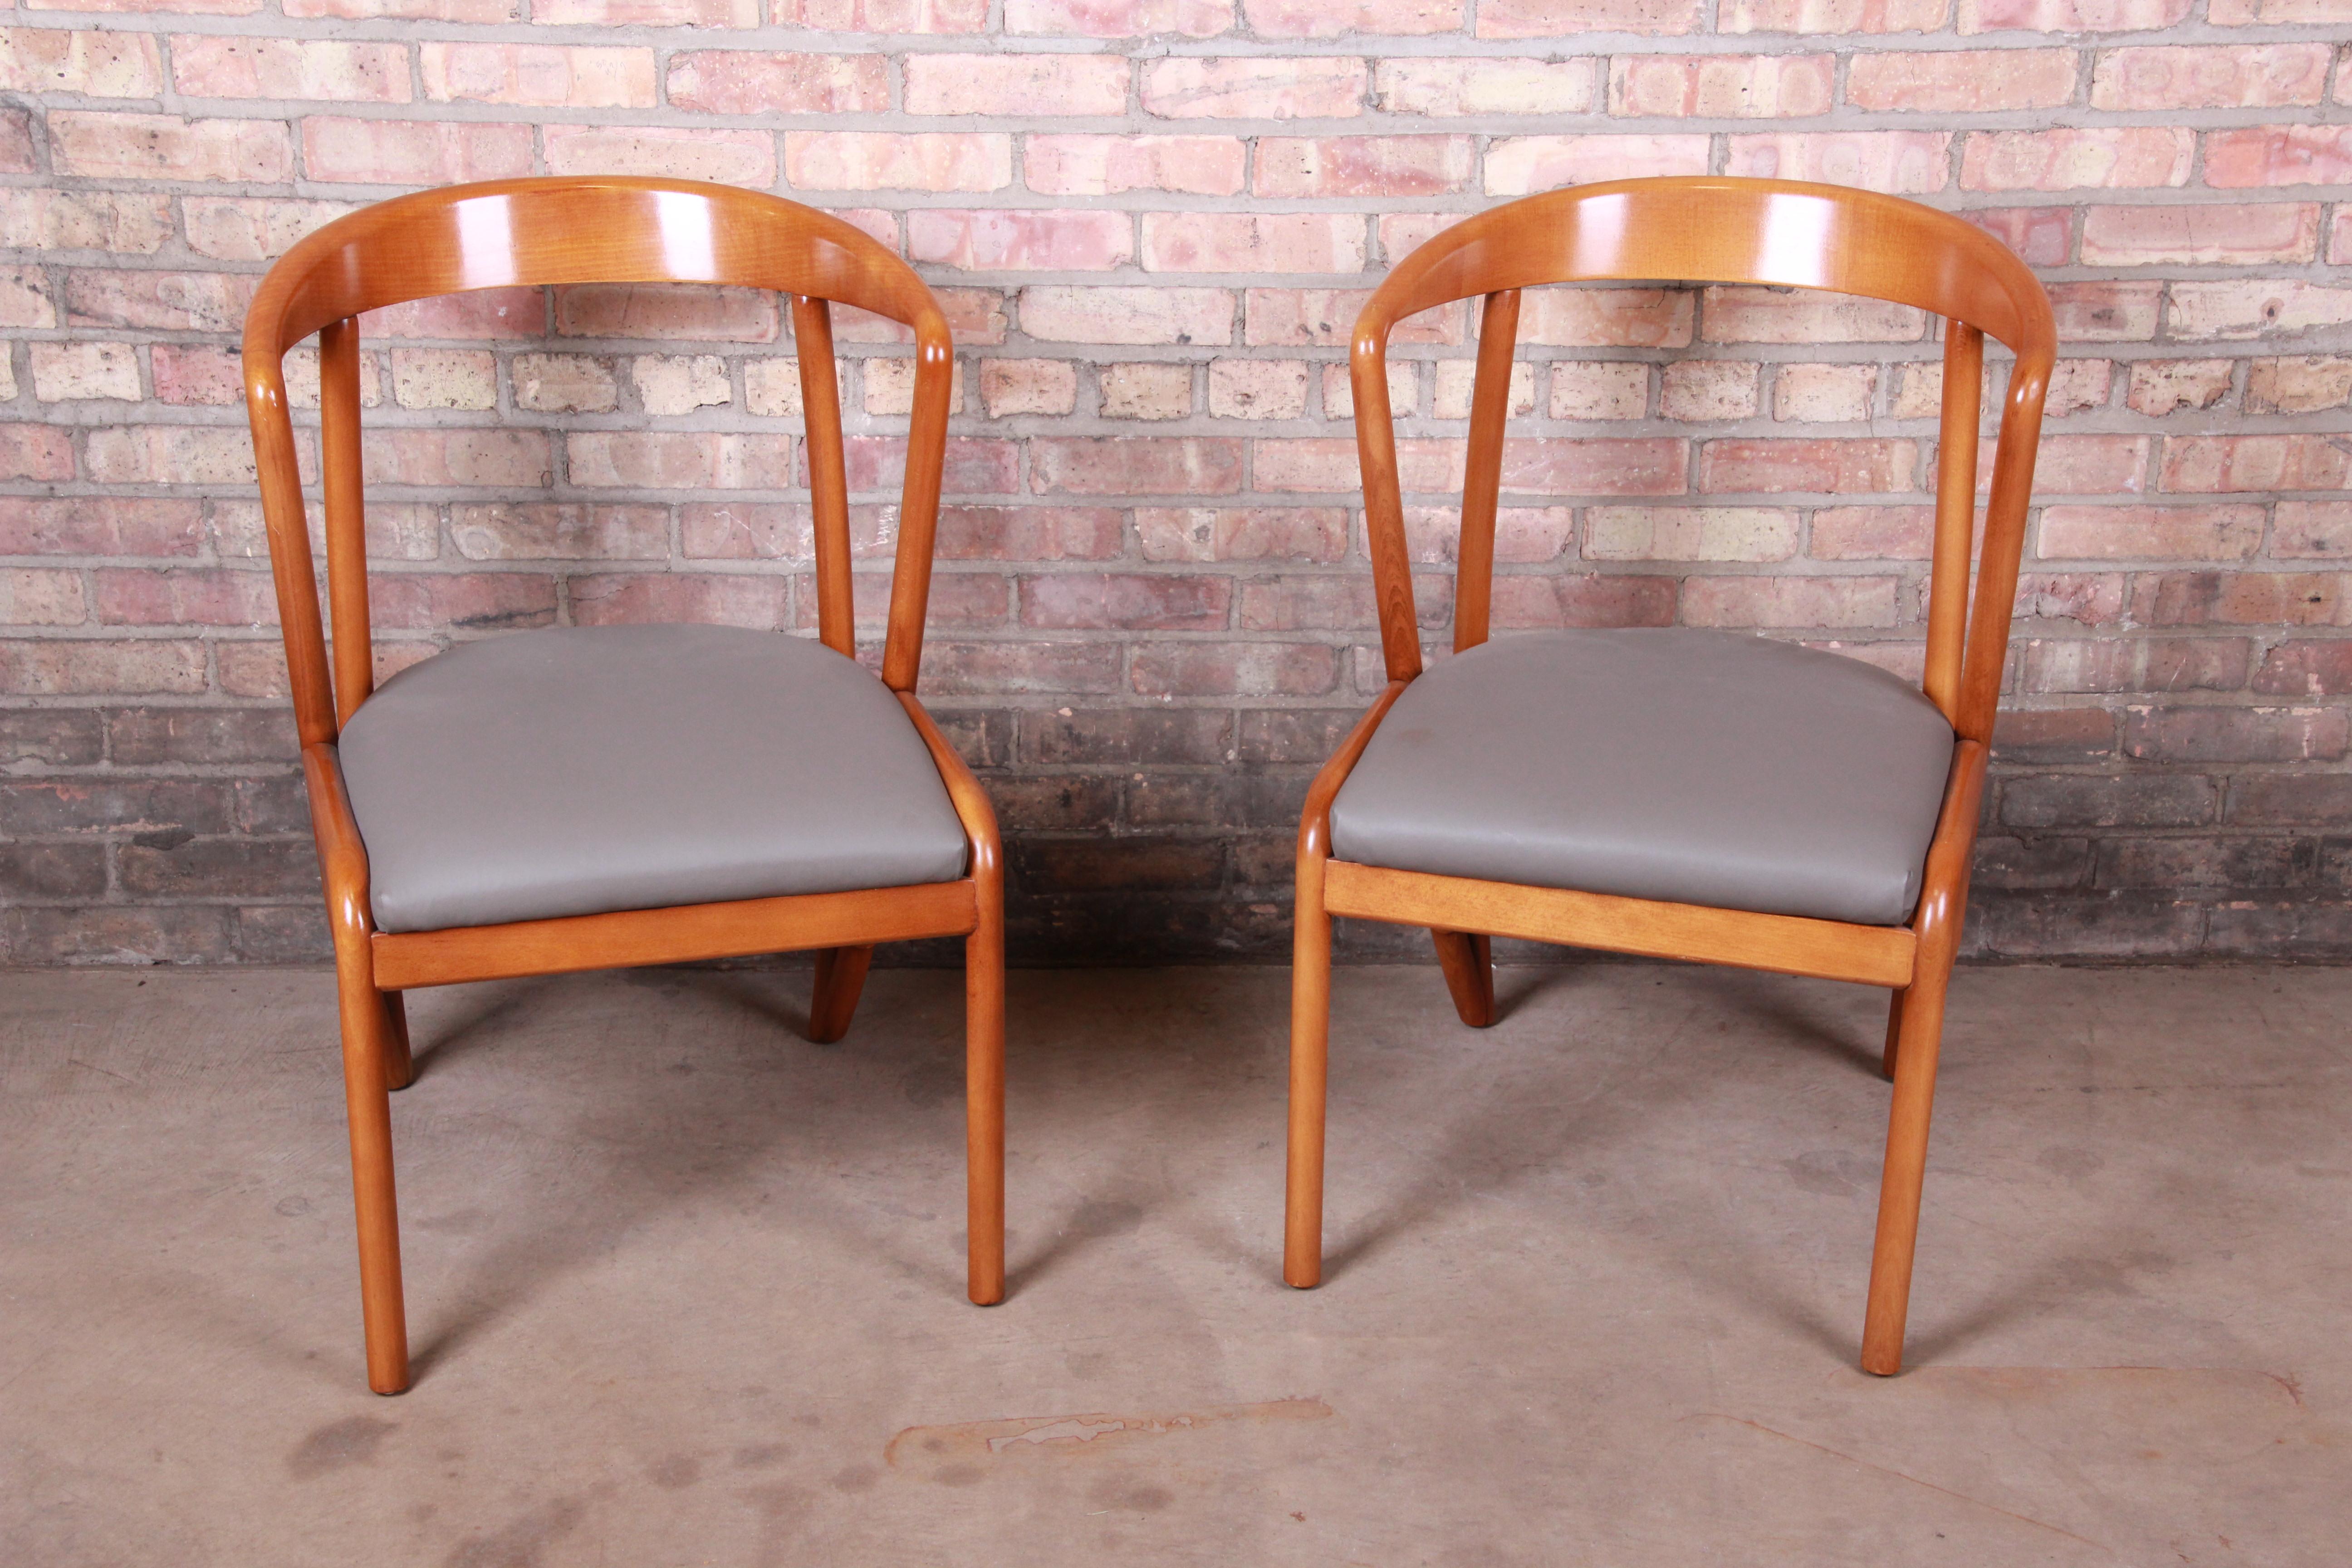 Baker Furniture Mid-Century Modern Sculpted Solid Maple Armchairs, Pair In Good Condition For Sale In South Bend, IN